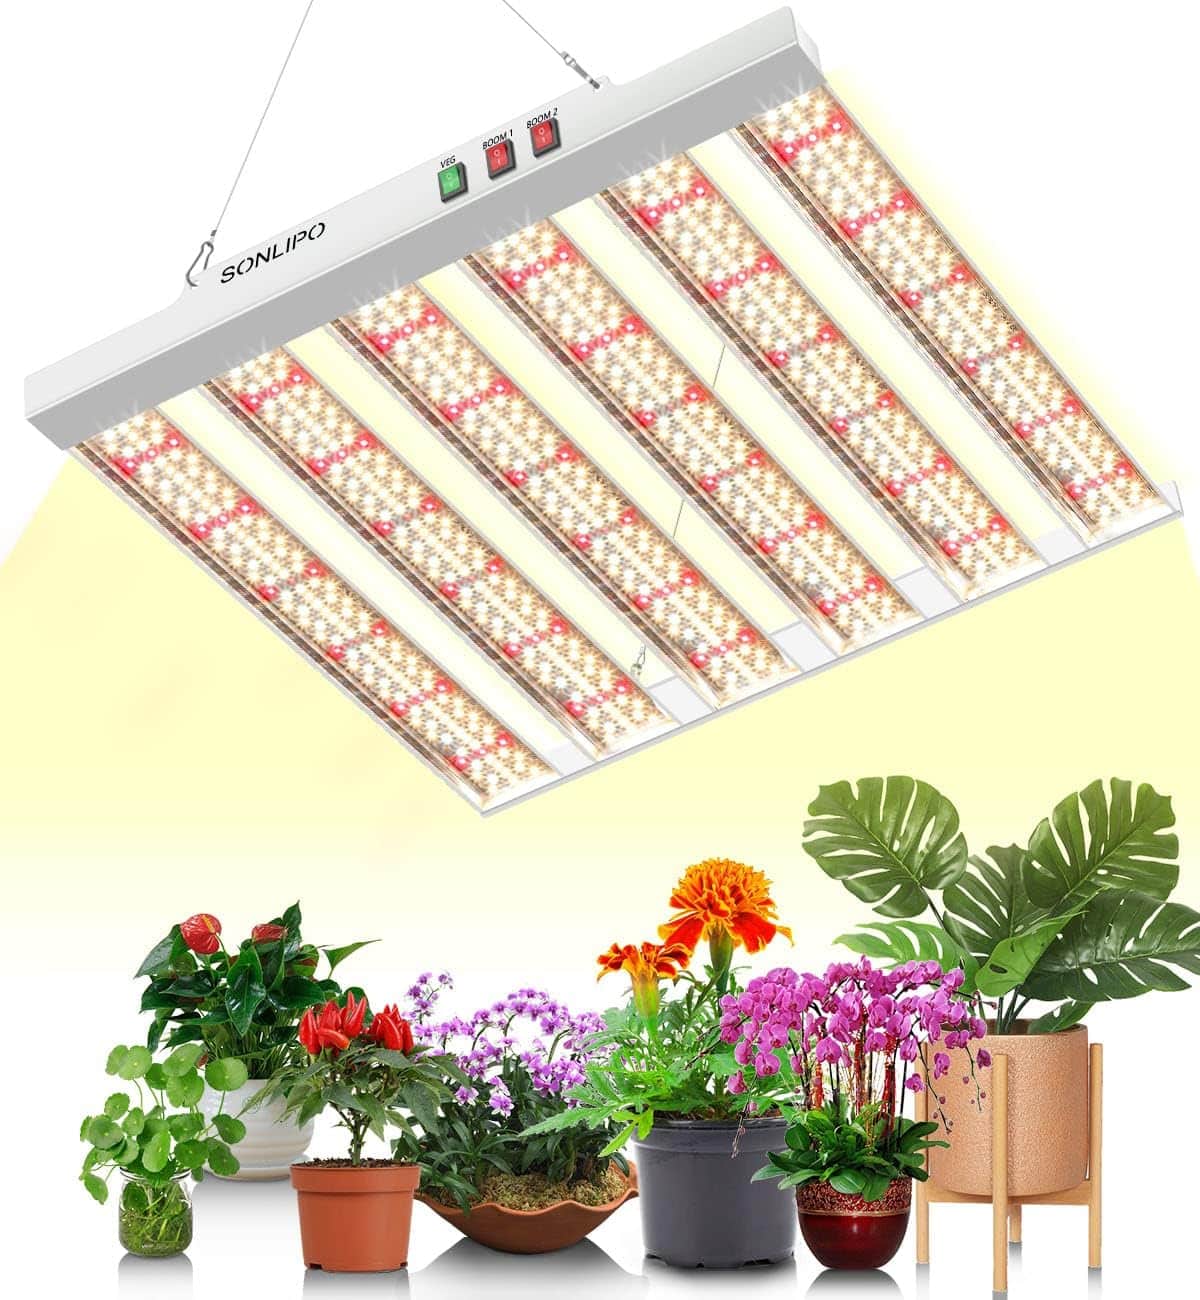 Sonlipo 2024 New SPF4000 400W LED Grow Light 5x5ft Coverage with New Diodes  IR Lights Full Spectrum Veg Bloom Growing Lamps for Indoor Plants Seeding Flower Led Plant Light Fixture